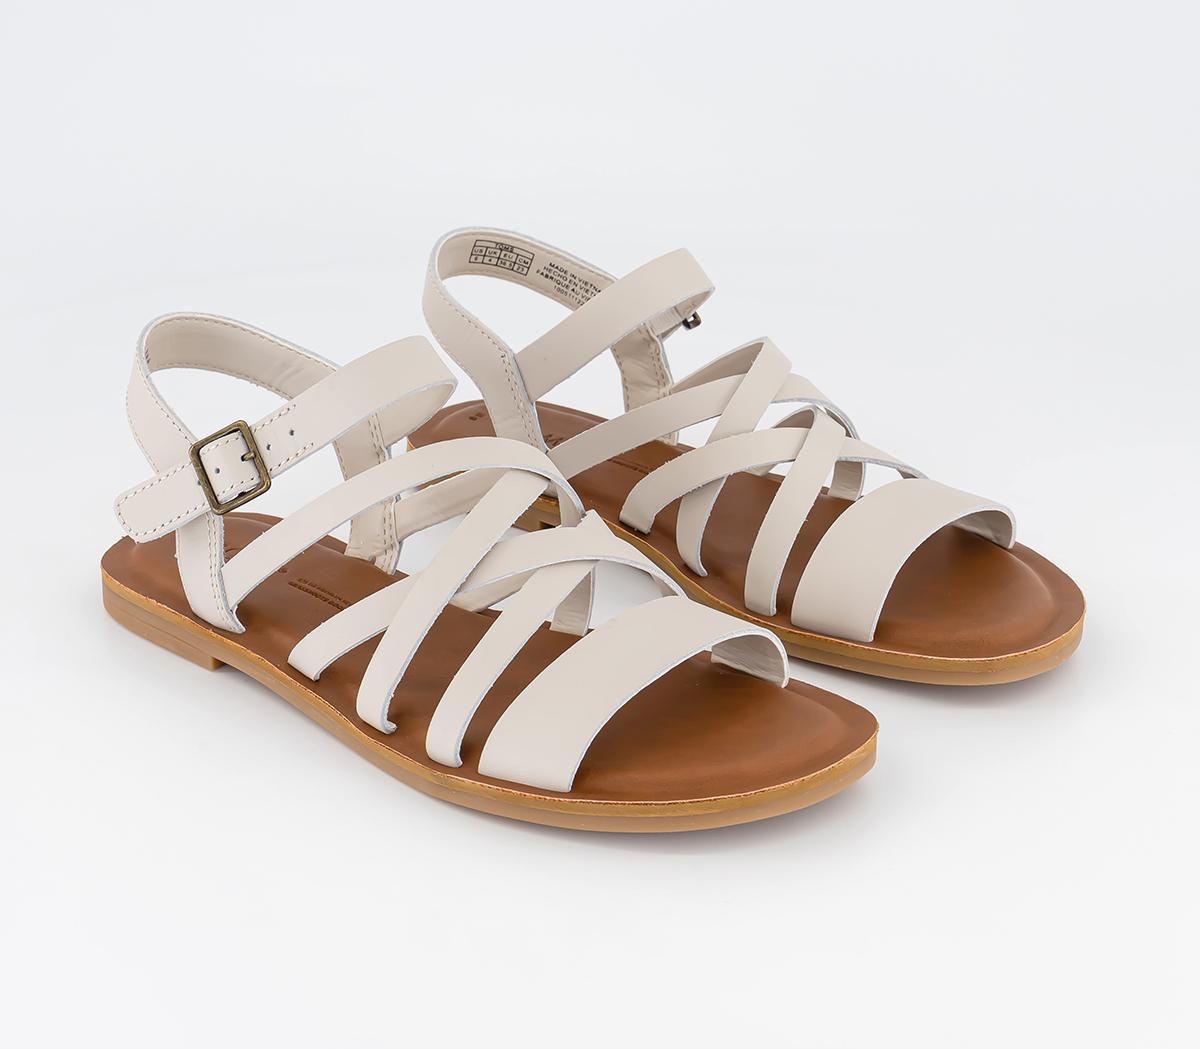 TOMS Womens Sephina Sandals White Putty Leather, 4